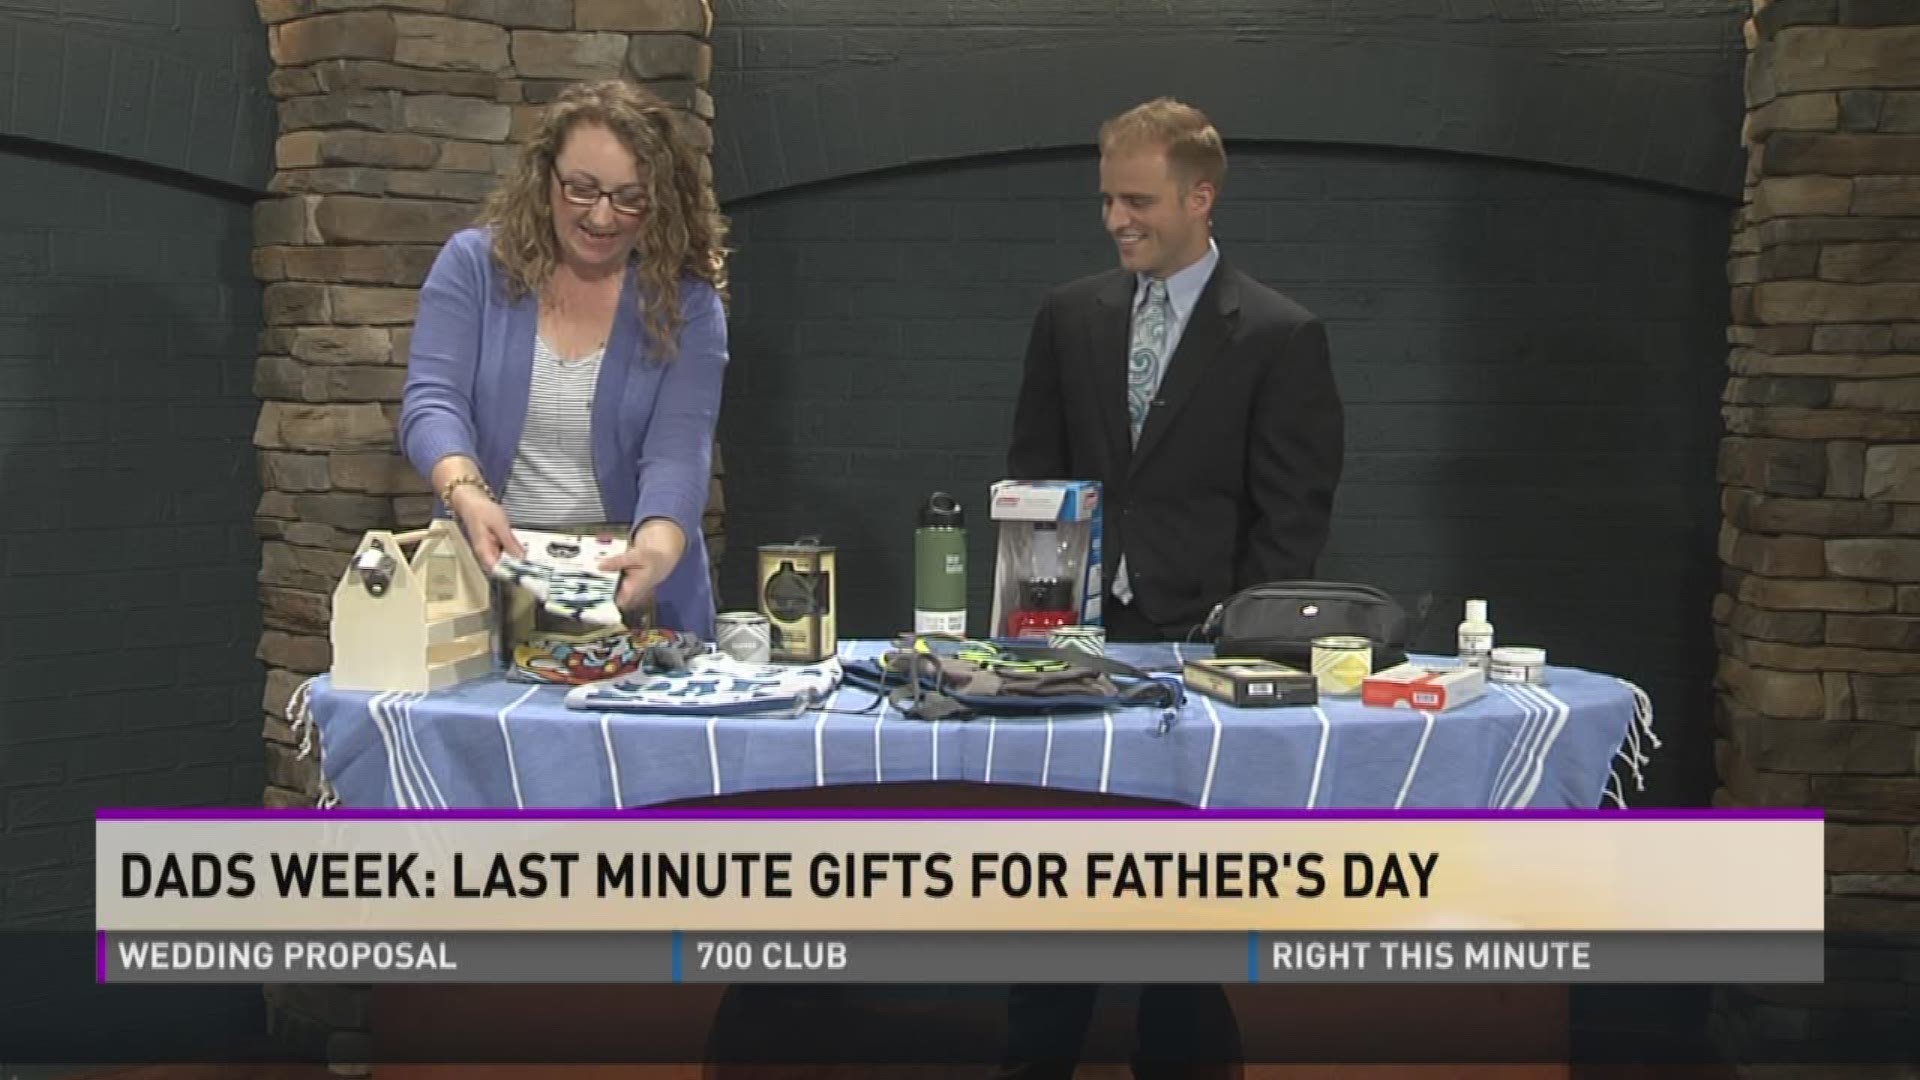 Dads Week: Last Minute Gifts for Father's Day